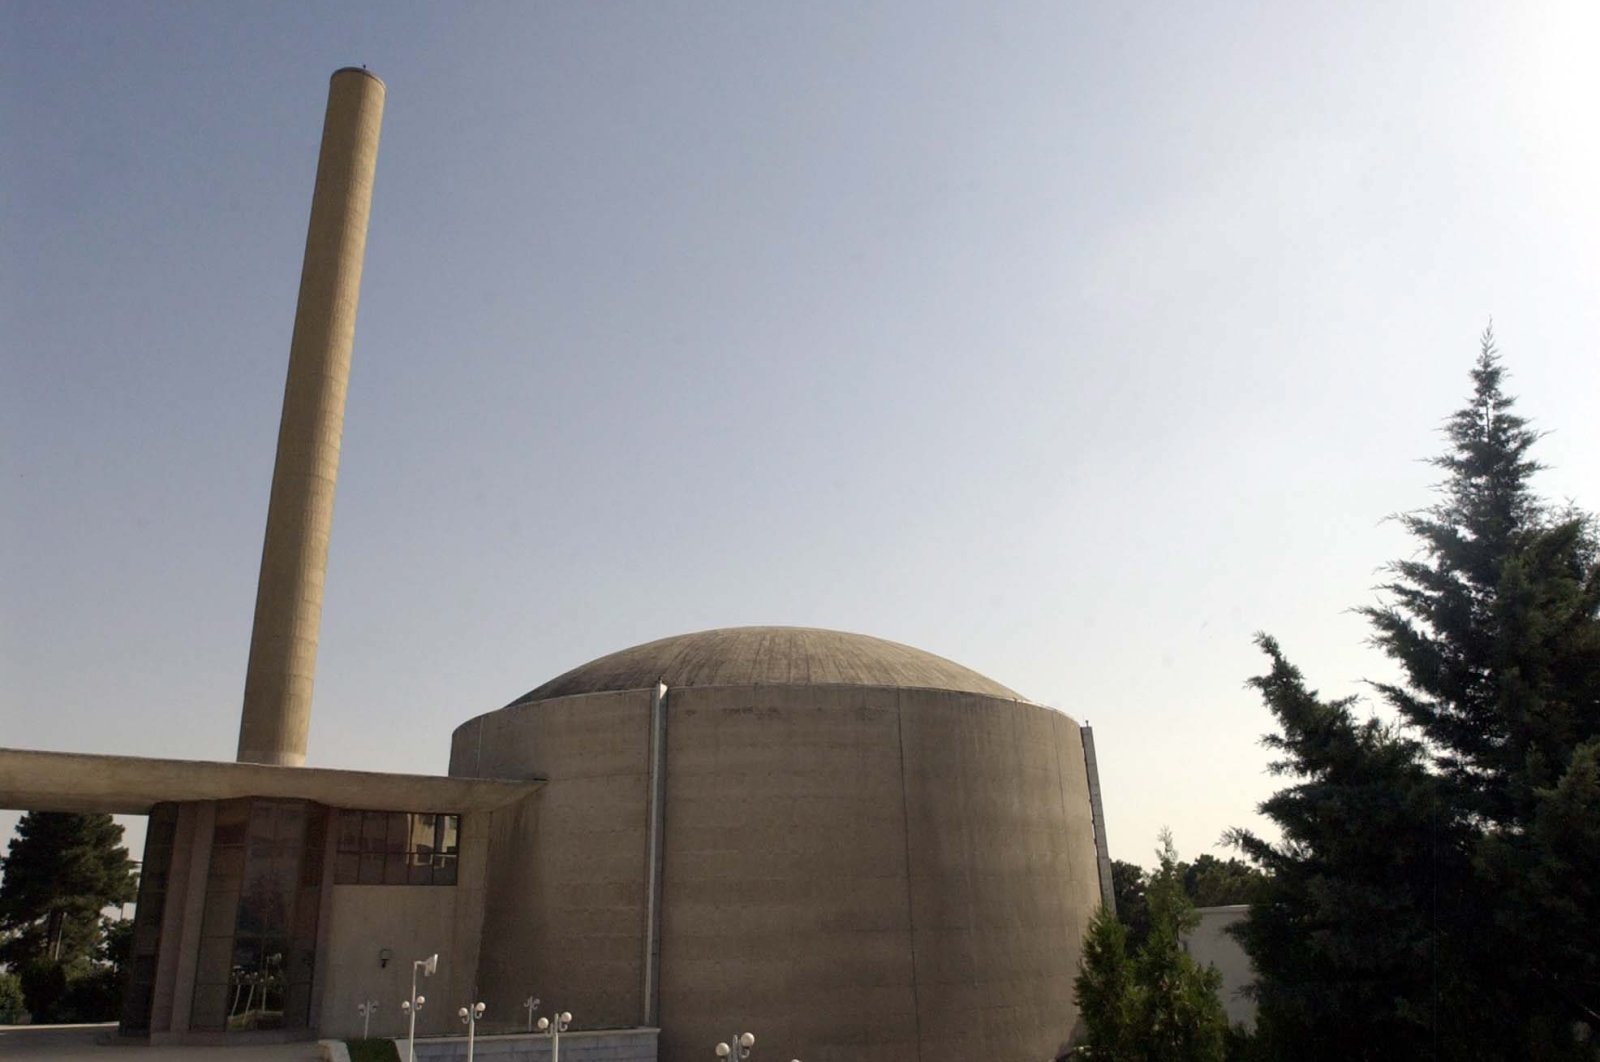 The building of Tehran's nuclear research reactor is seen at the Iran's Atomic Energy Organization's headquarters, in Tehran, Iran, June 21, 2003. (AP Photo)